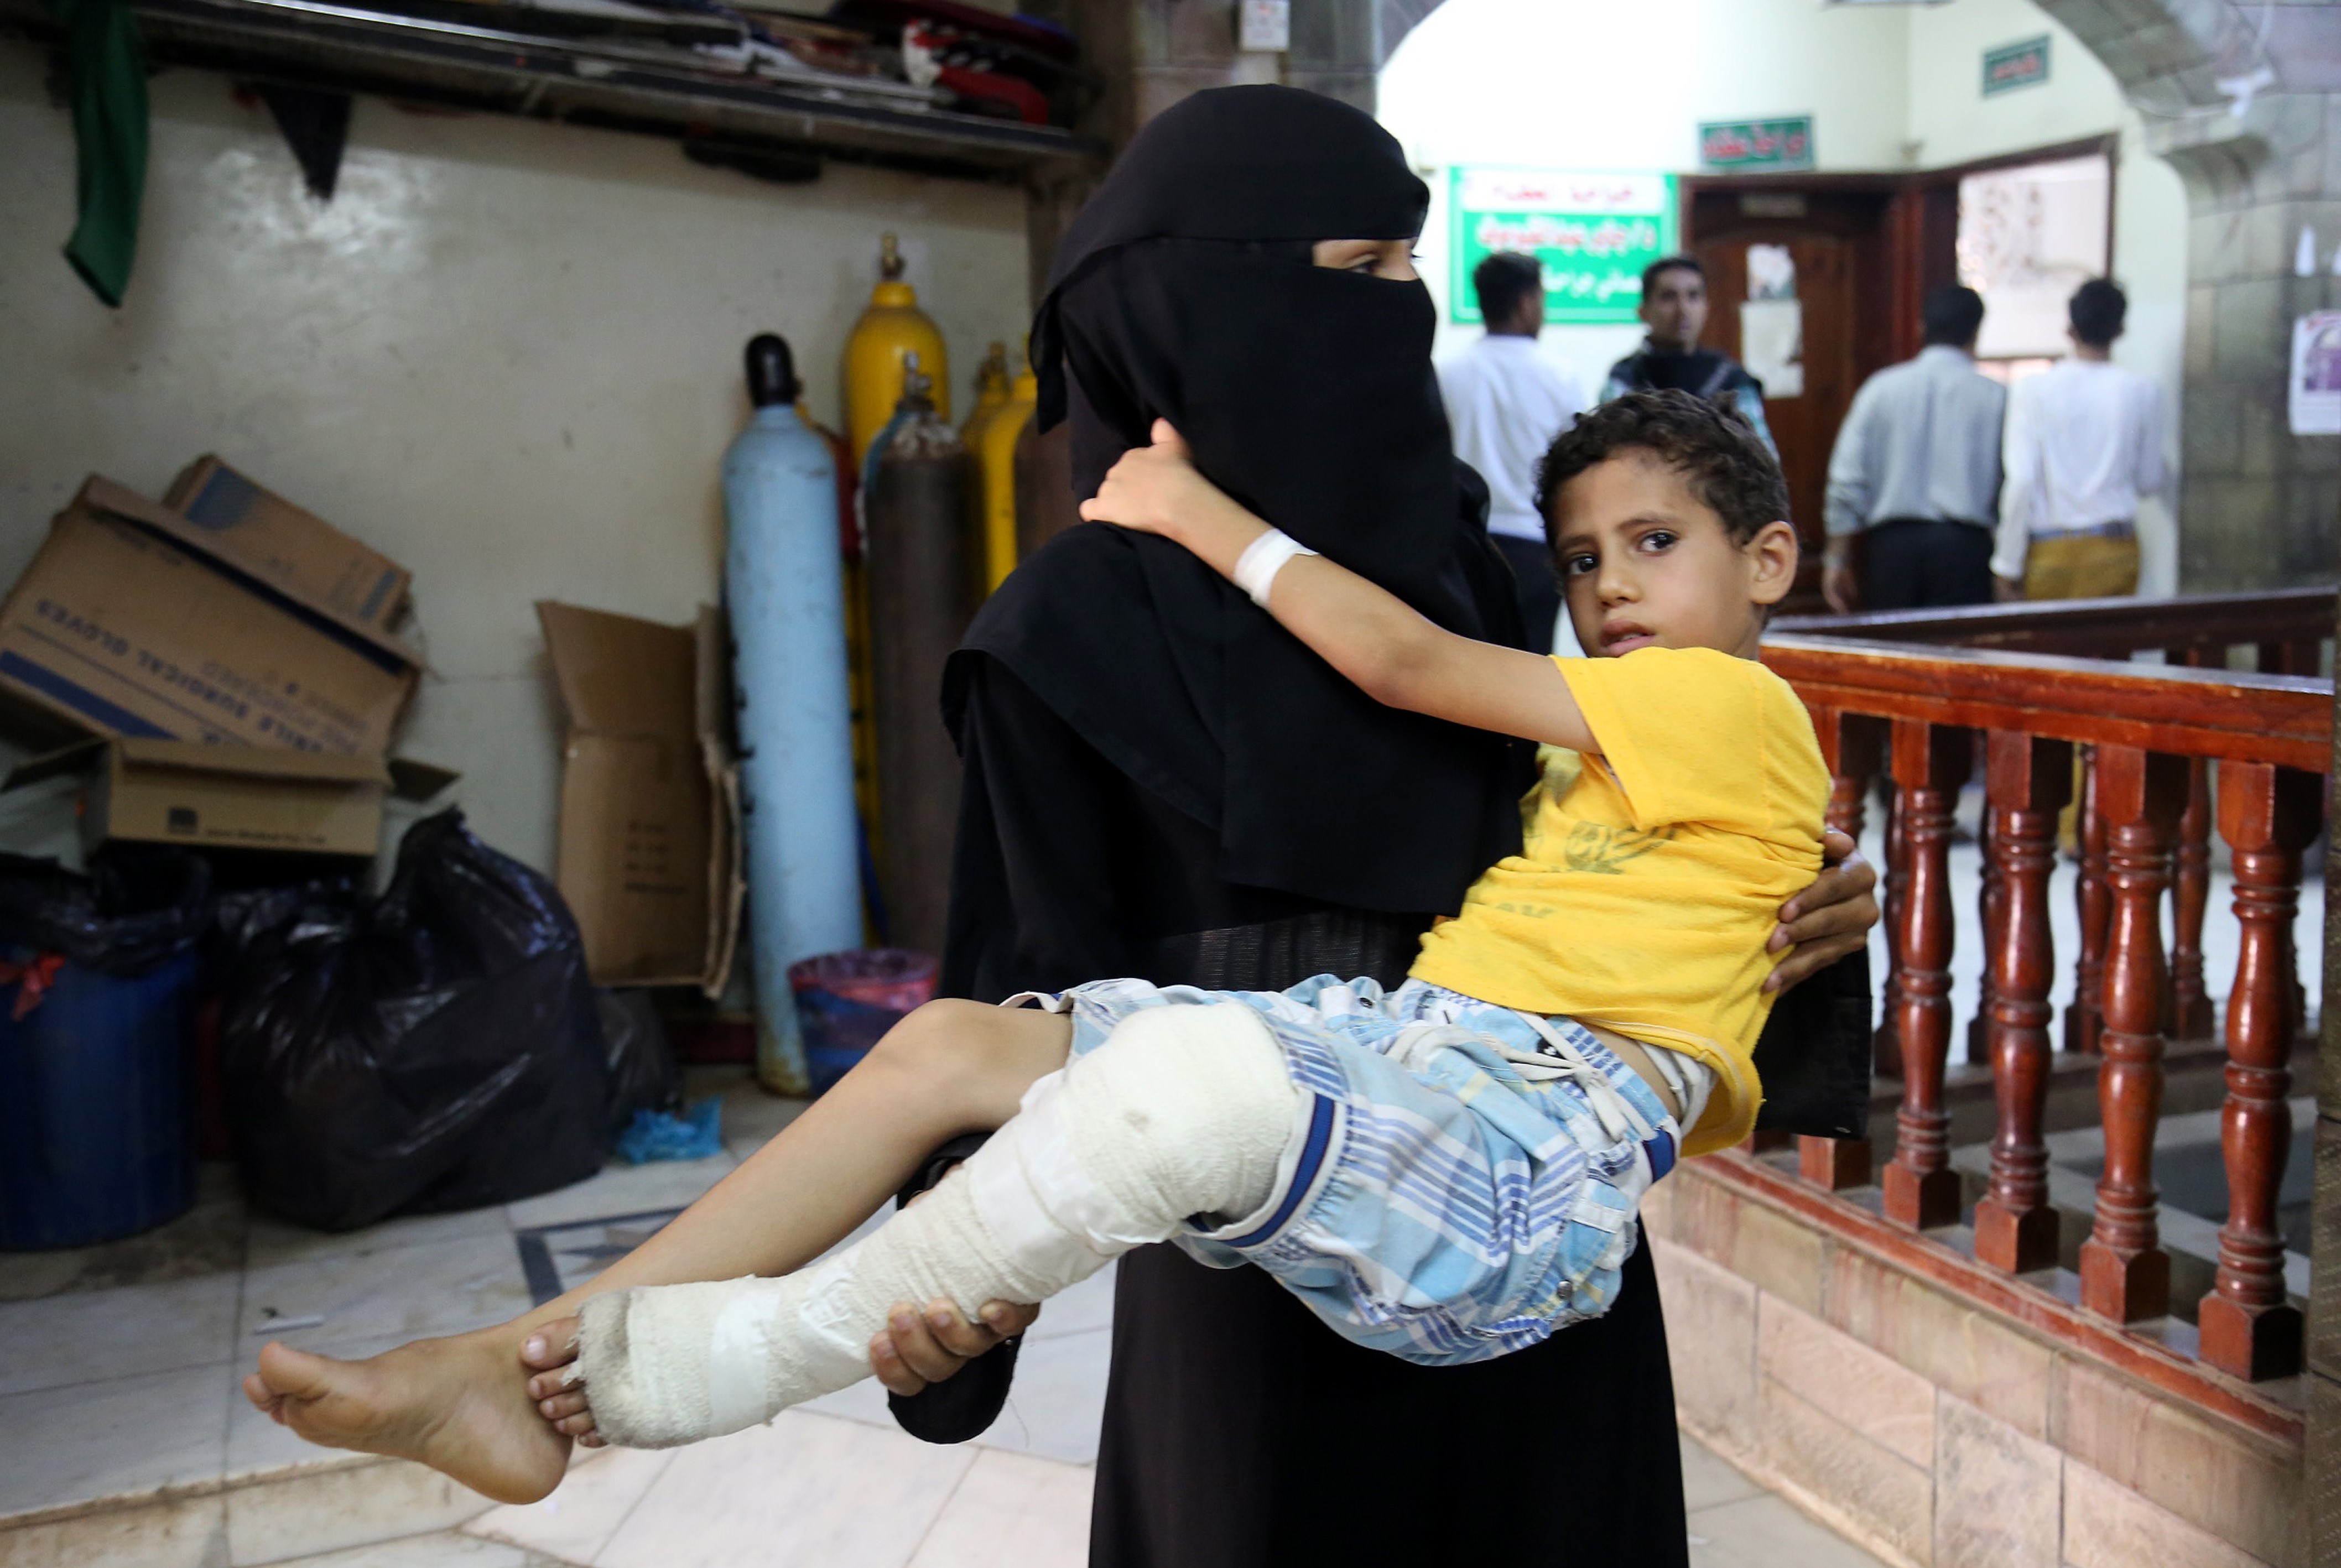 A woman carries a boy who has been injured in a Shiite Houthi attack, targeting residential areas, to es-Sevra hospital, in Taiz, Yemen, on June 4, 2016. (Anadolu Agency/Getty Images)